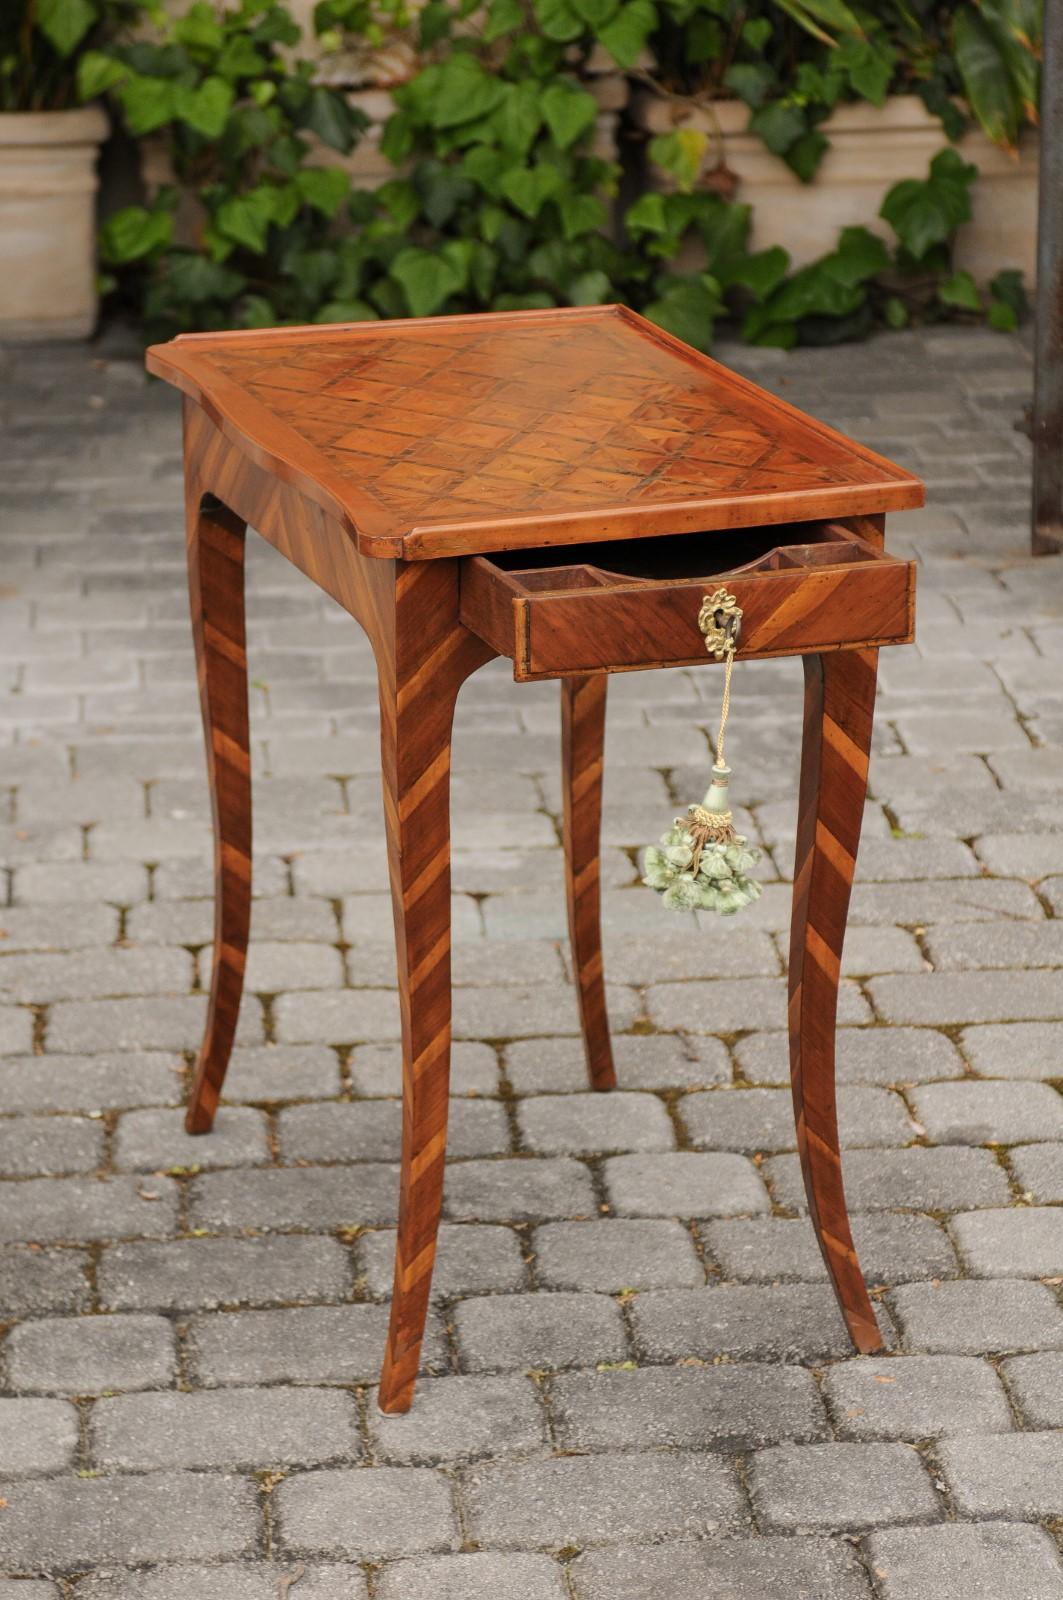 Italian 1820s Walnut Side Table with Marquetry Top, Inlaid Legs and Side Drawer For Sale 6